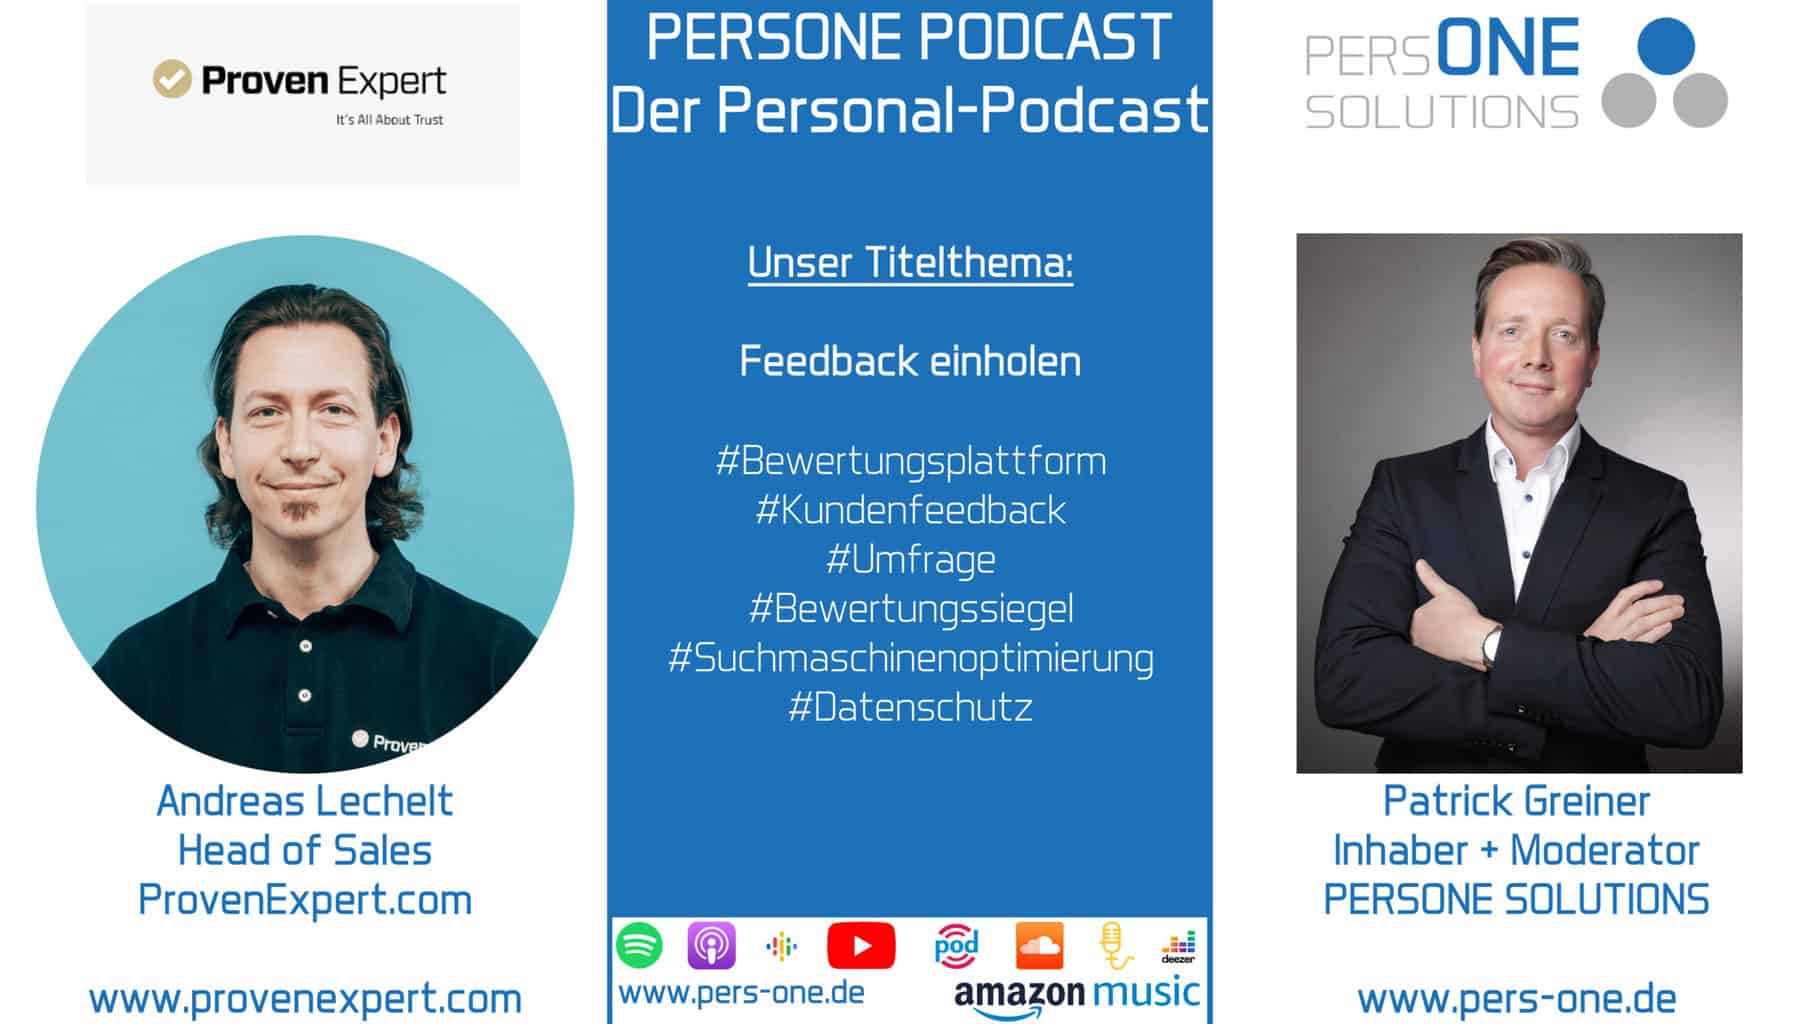 Lechelt, Andreas_ProvenExpert_Interview2-SM Layout_PERSONE PODCAST